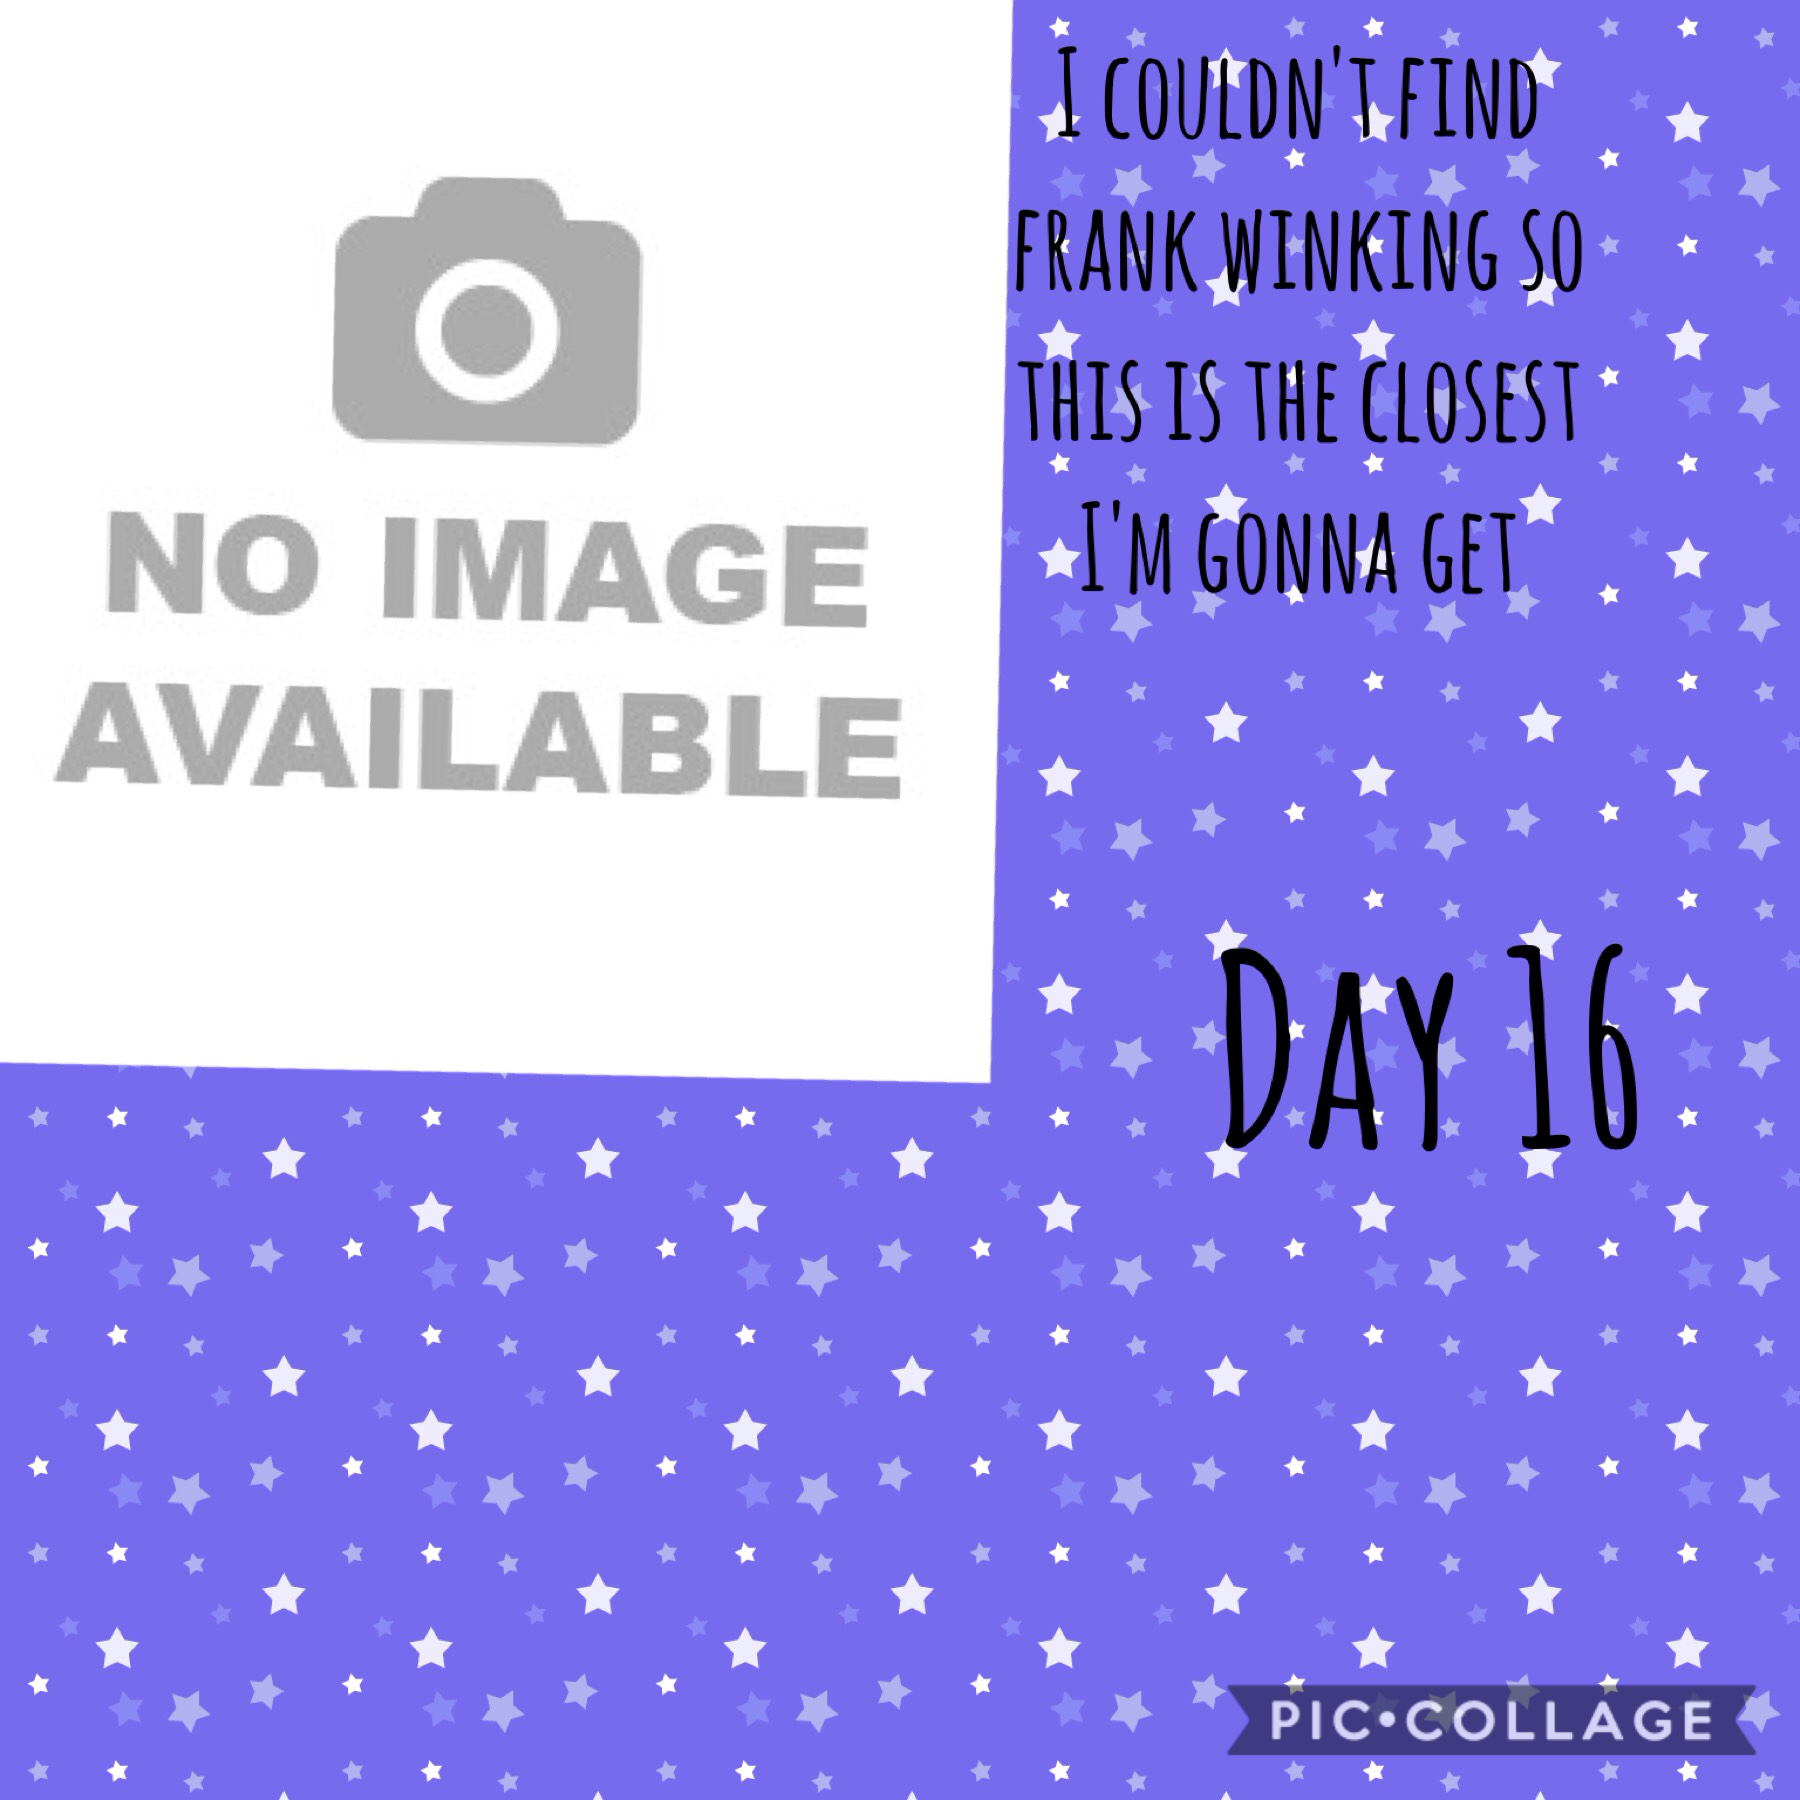 Day 16 5/19/19